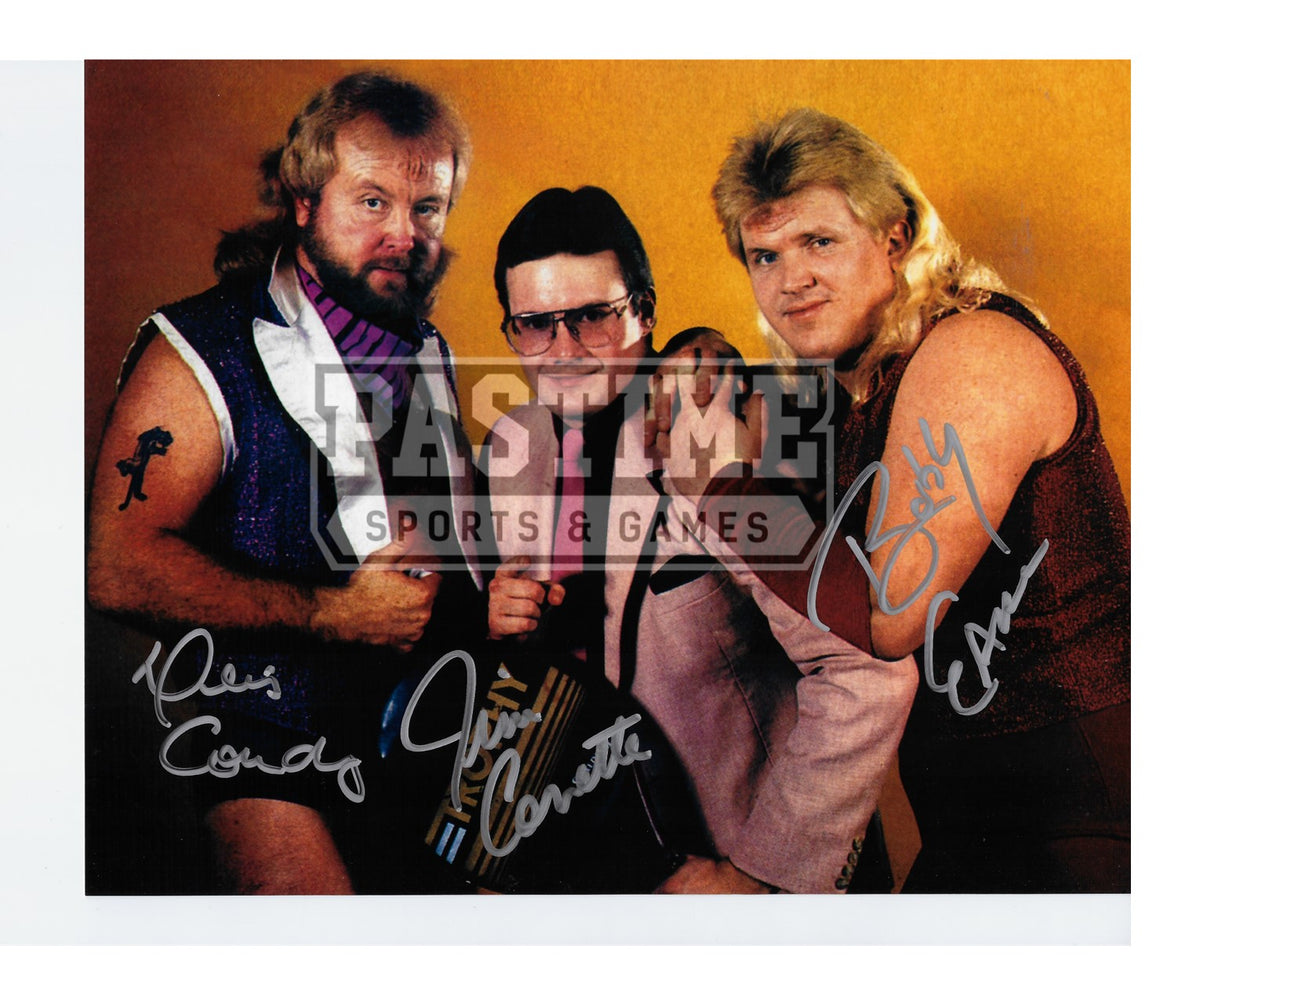 The Midnight Express - Condrey, Eaton, Corrette Photo Autographed Wrestling 8x10 - Pastime Sports & Games